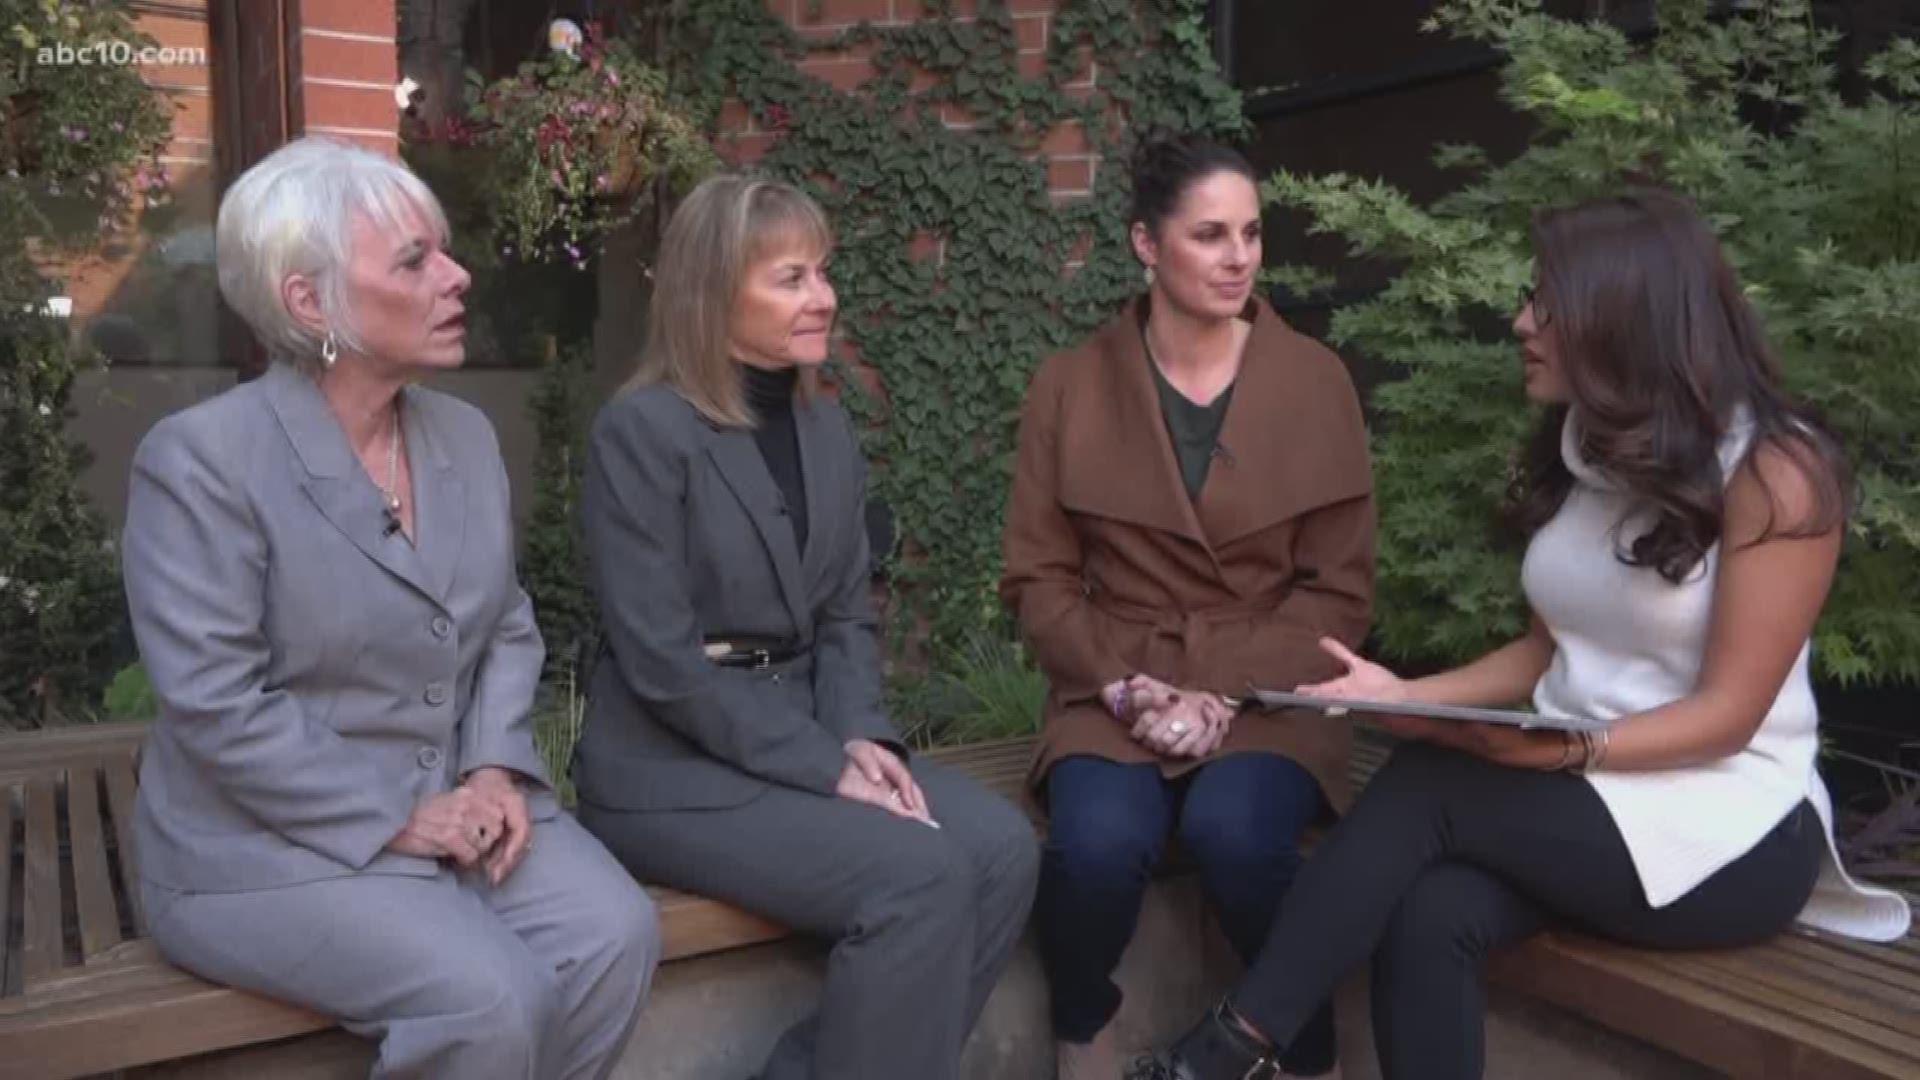 Megan is joined by Kayte Christensen, Sacramento Kings courtside reporter, Jan Scully, retired Sacramento County DA, and Faith Whitmore, CEO of the Family Justice Center, to discuss Domestic Violence Awareness month.